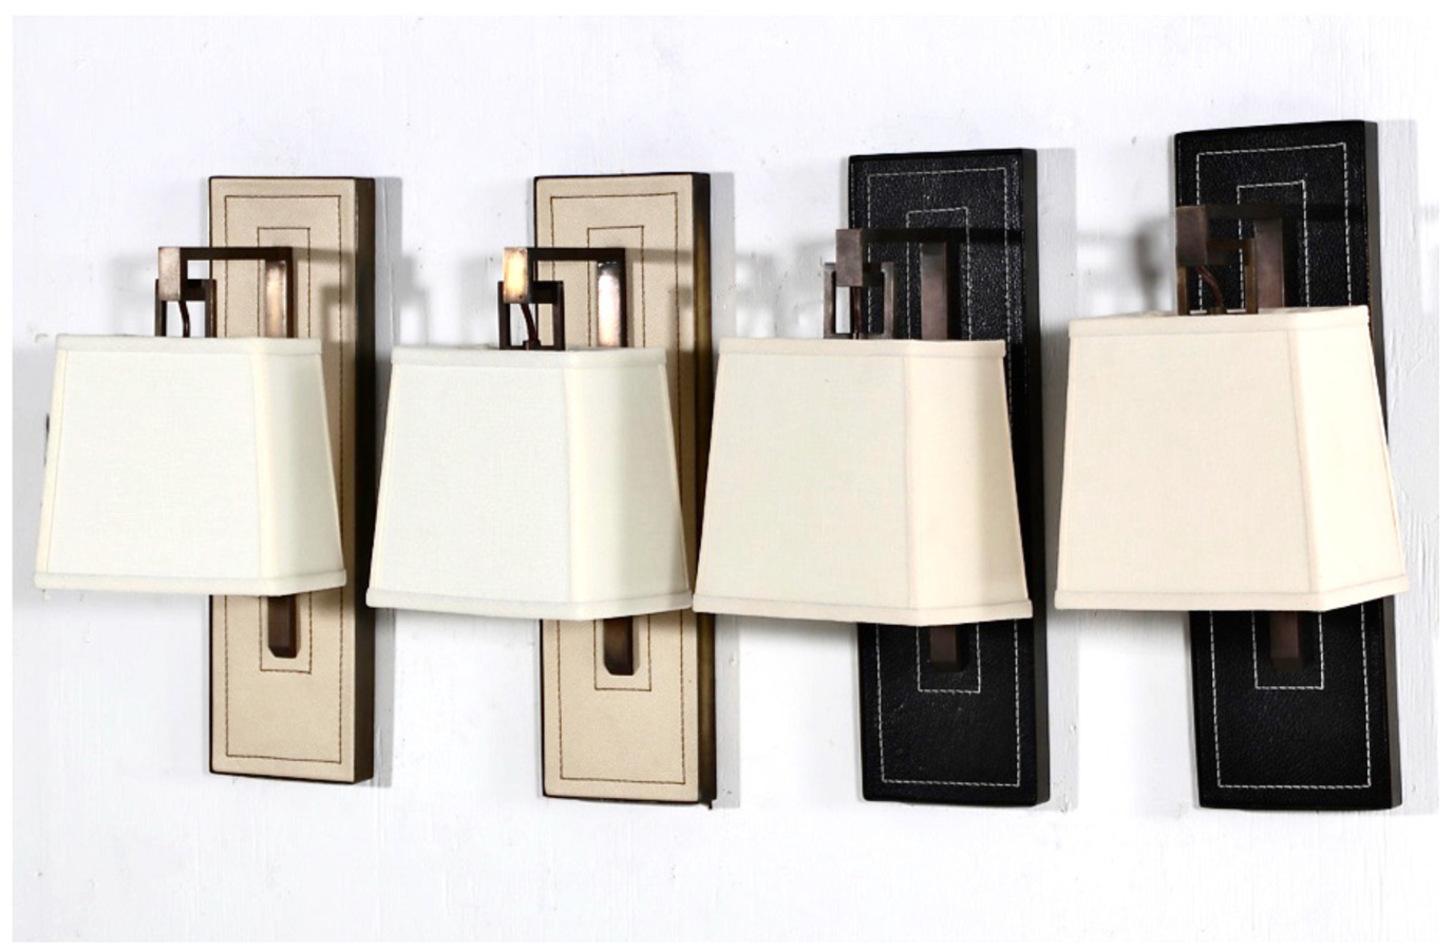 Shown are two pairs of the very desirable Paul Marra Brass and Leather Art Deco/Moderne style wall sconces. The sconces show the design influence of Jacques Adnet in the stitched leather detailing of the sconces' back plates. The design is further